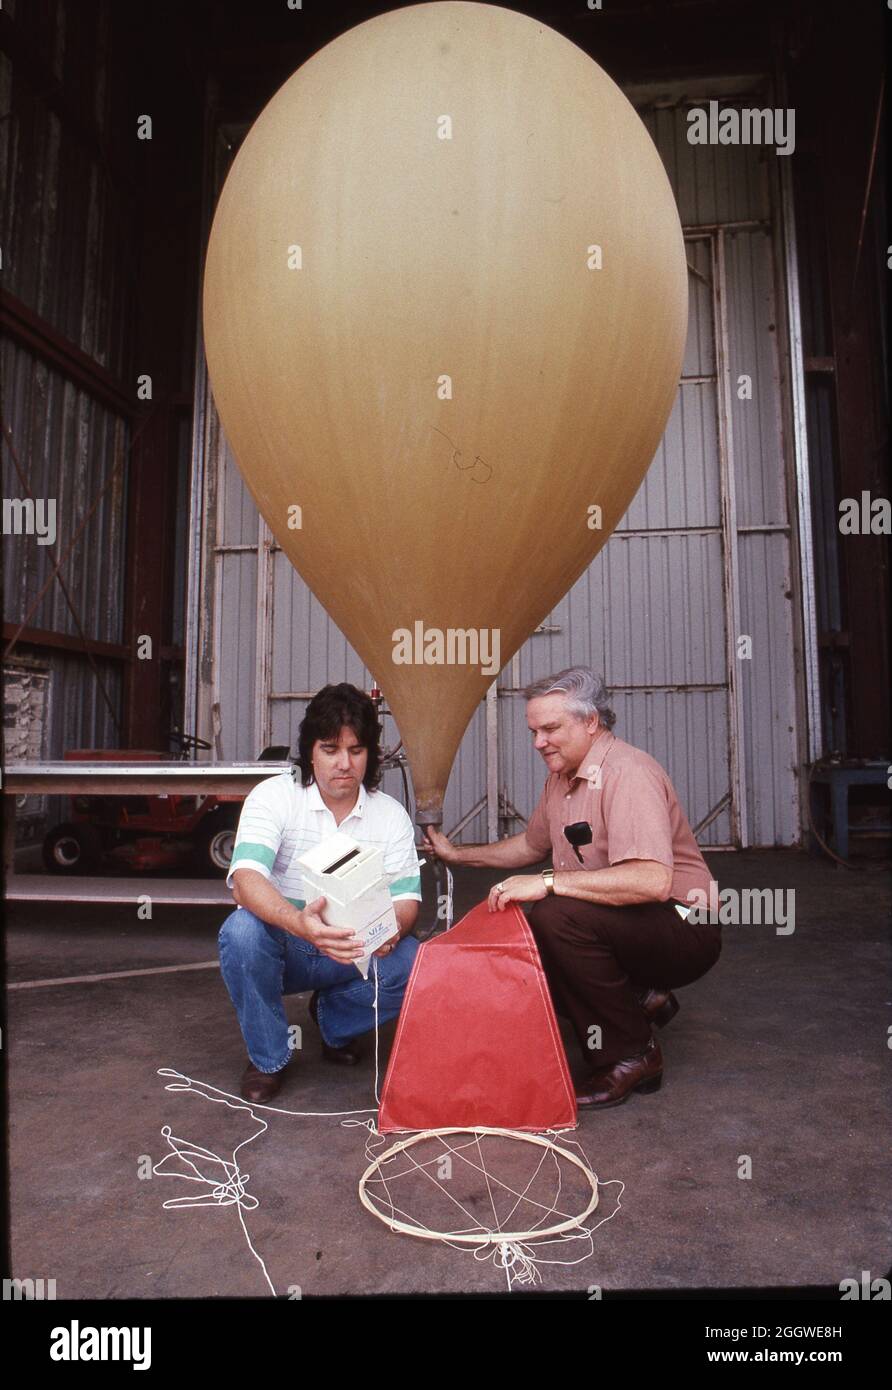 ©1989 National Weather Service launching a weather balloon in Victoria, TX  MR RE-087 Stock Photo